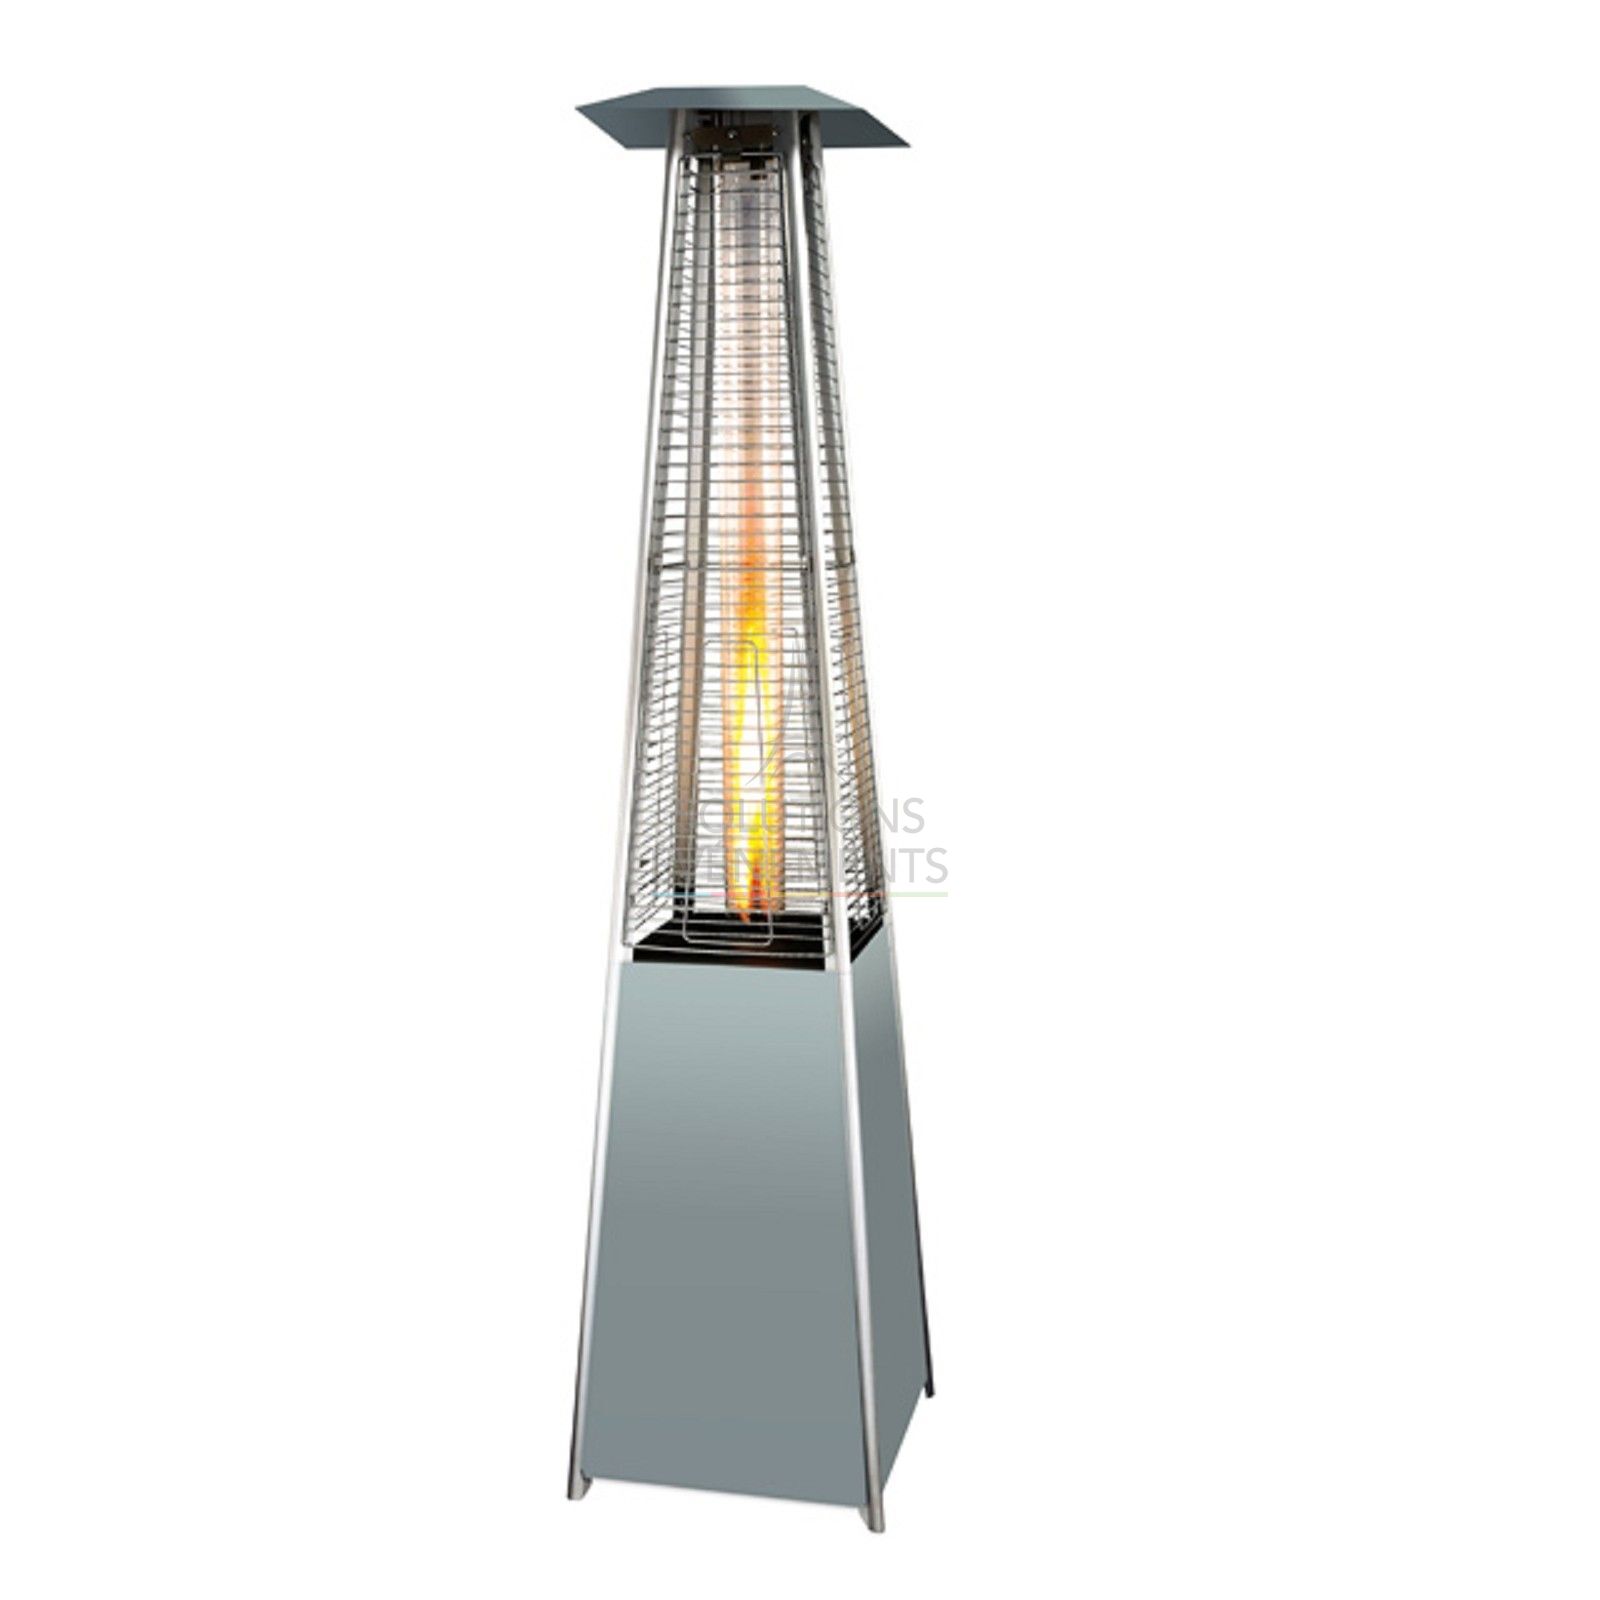 Gas heating for terraces and events, parasol type heater with designer flame